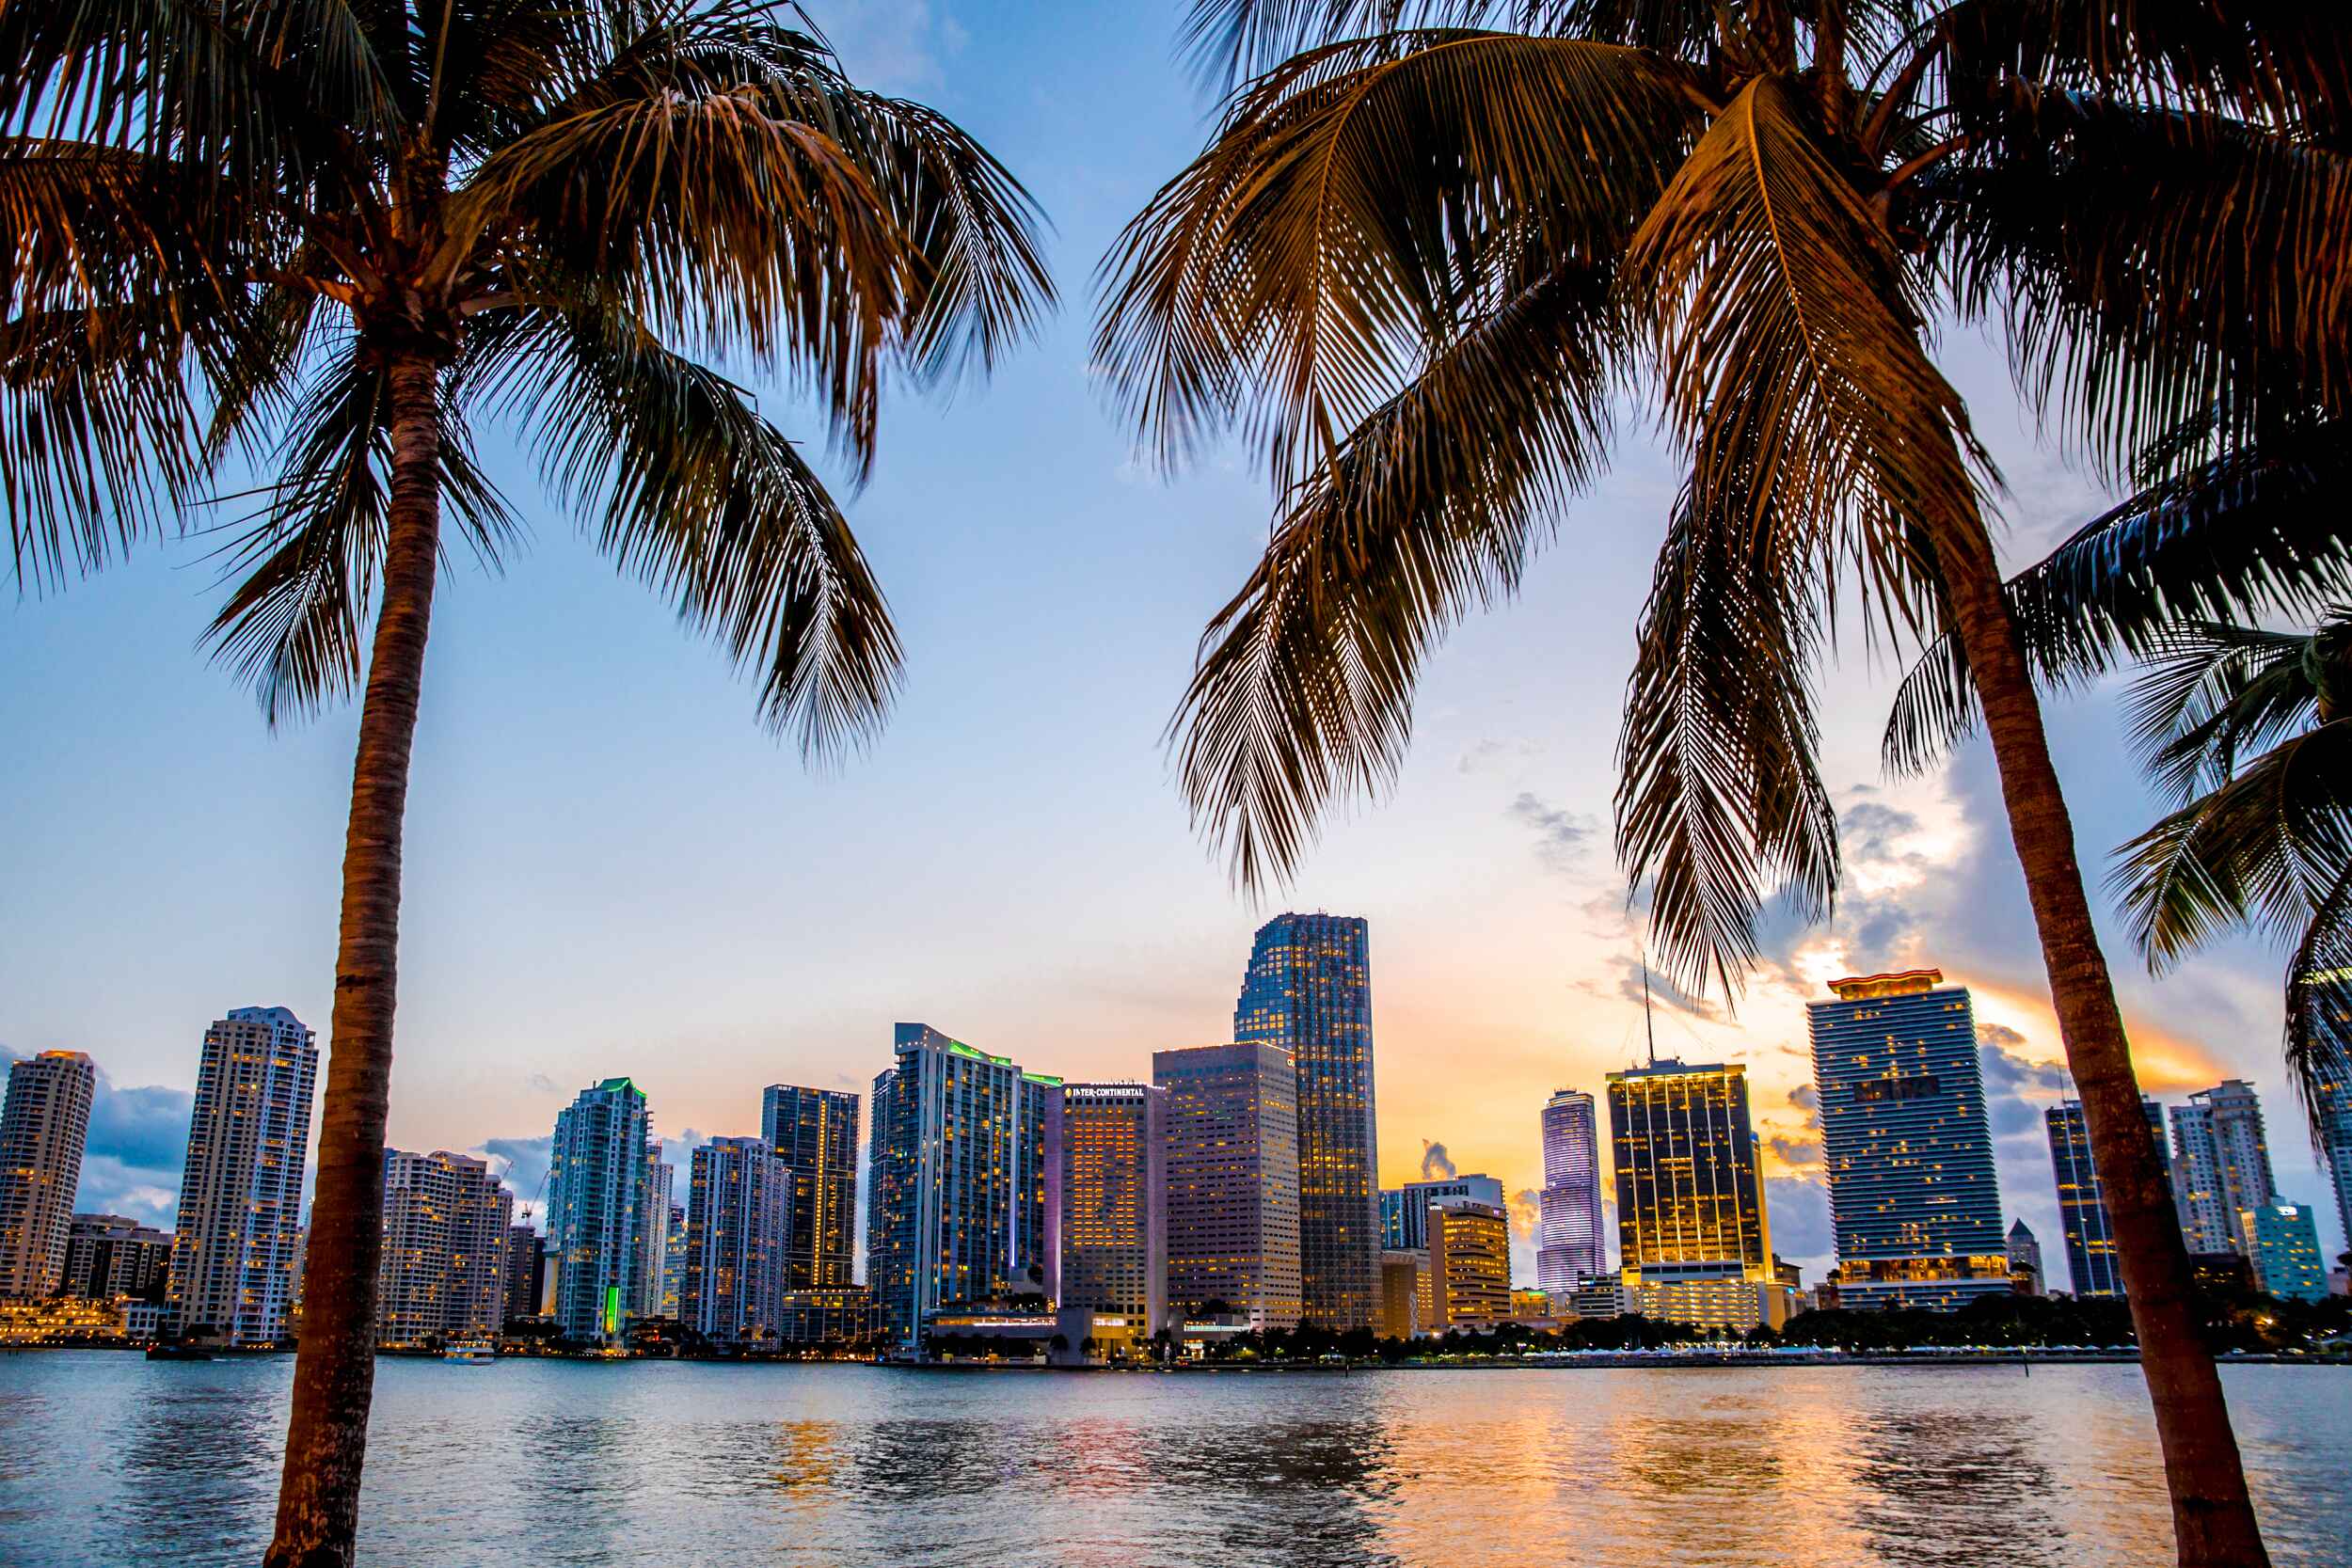 Downtown Miami on the water with palm trees